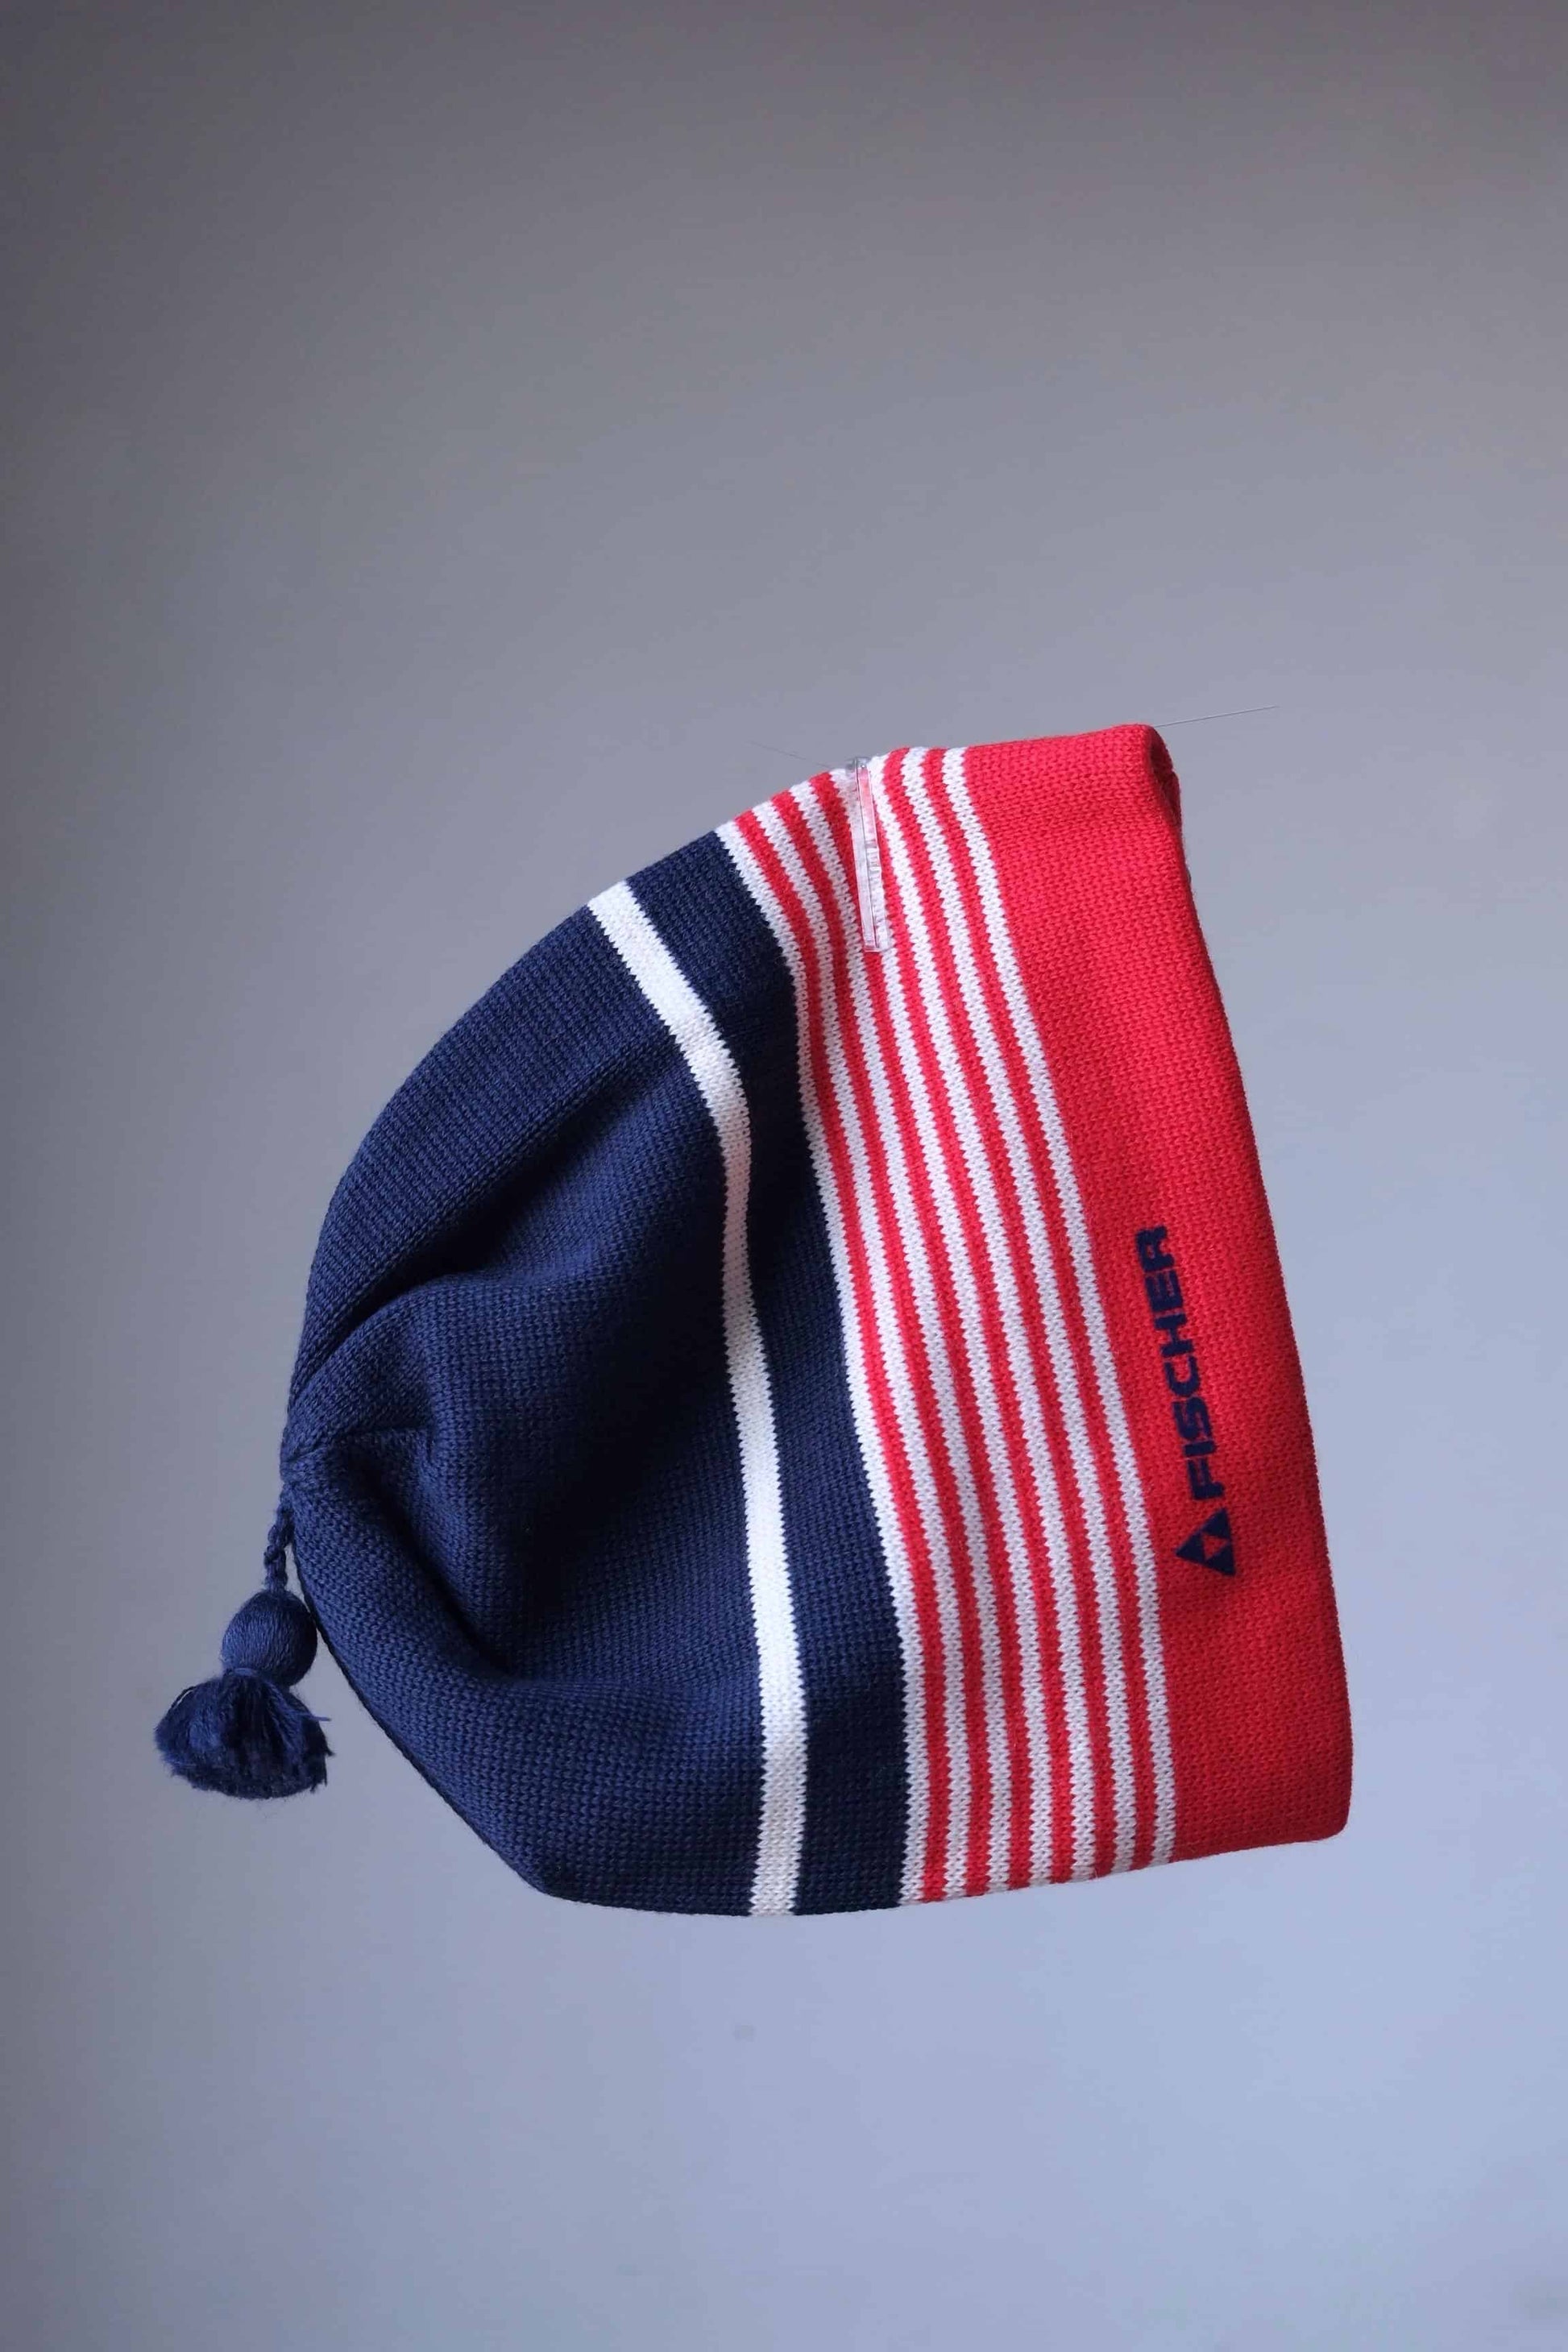 Tuque bonnet ski vintage wool. Navy blue, white and red. Year 70